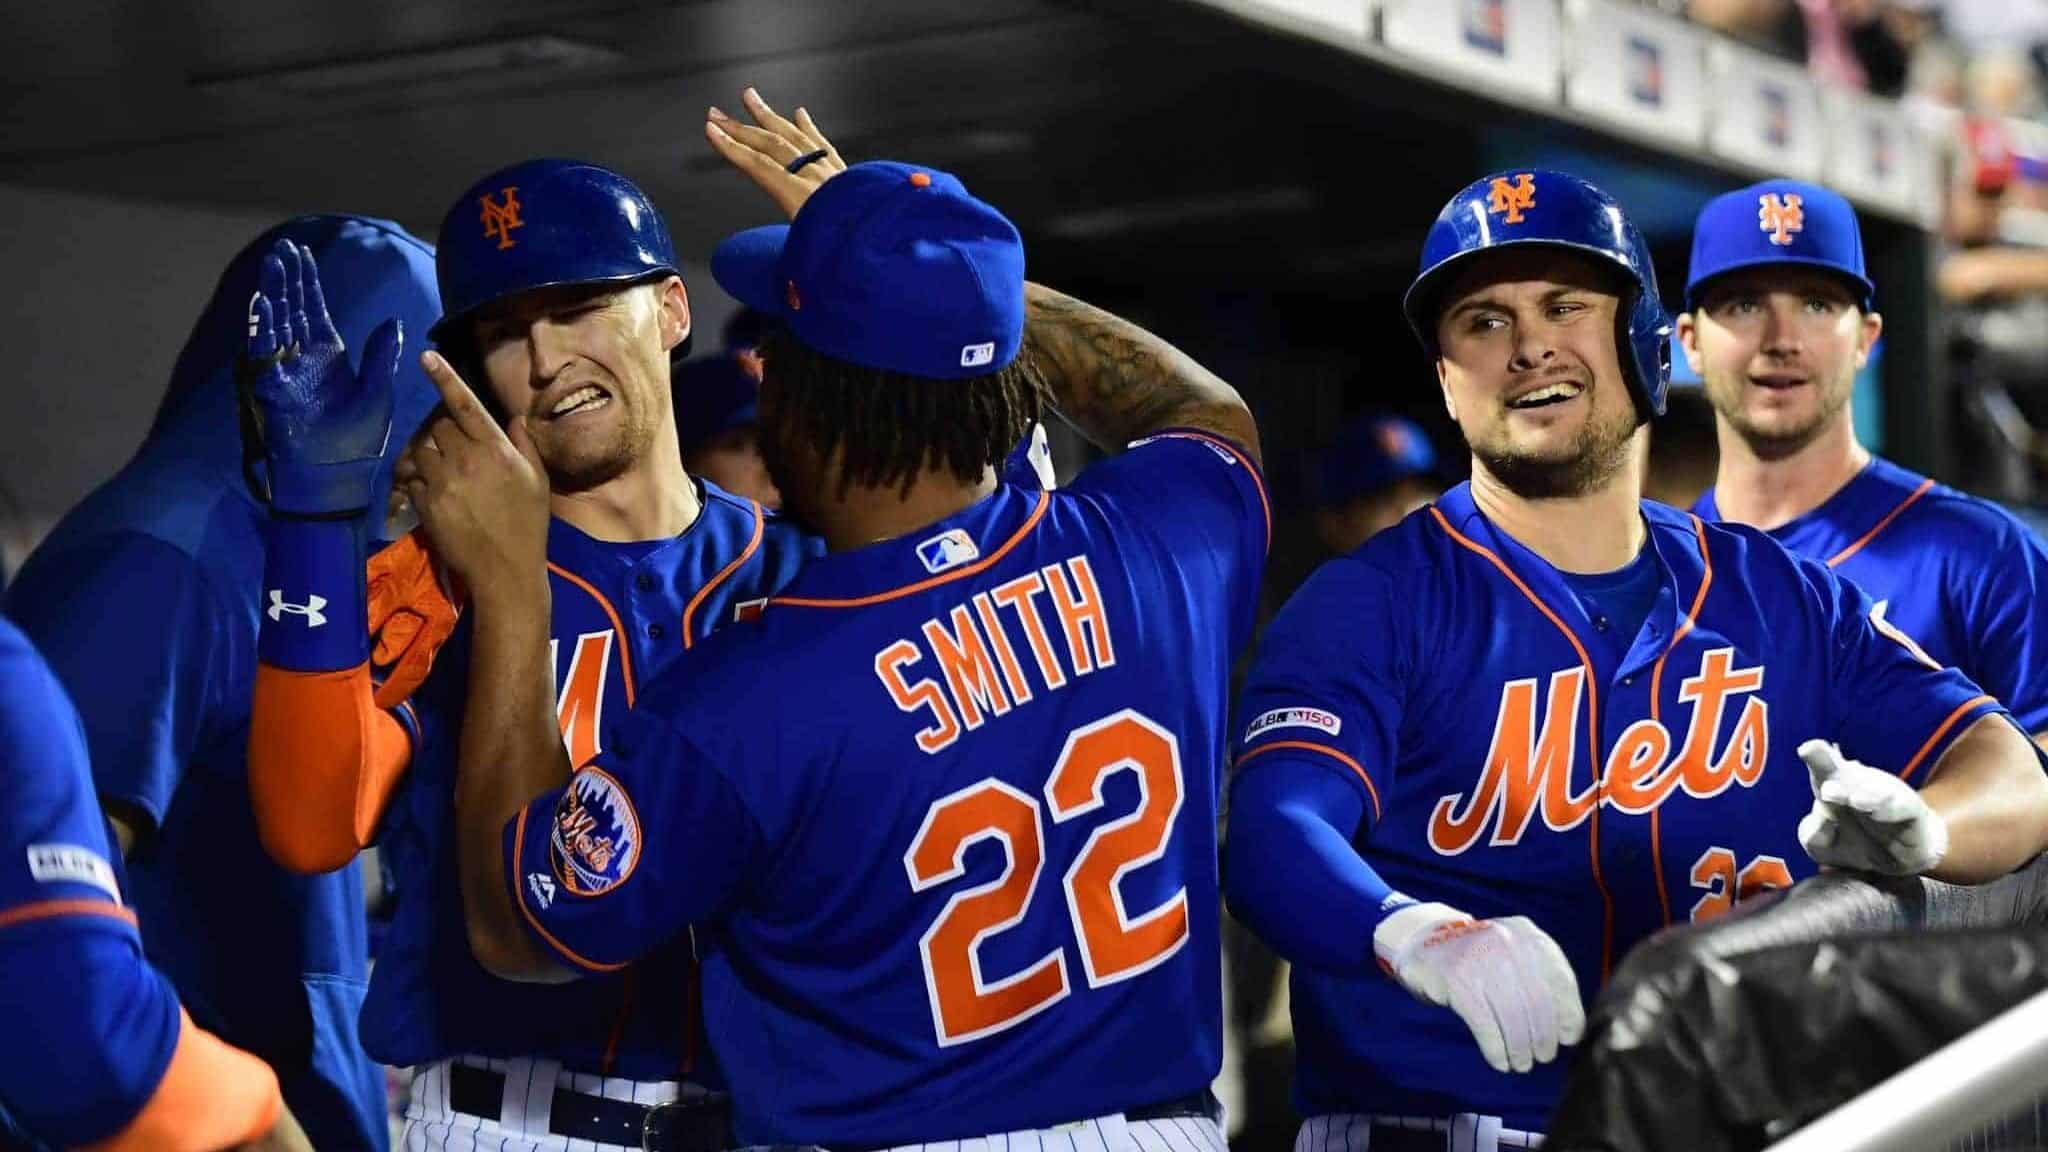 NEW YORK, NEW YORK - SEPTEMBER 27: J.D. Davis #28 and Dominic Smith #22 of the New York Mets celebrate after Davis's home run in the fourth inning of their game against the Atlanta Braves at Citi Field on September 27, 2019 in the Flushing neighborhood of the Queens borough of New York City.